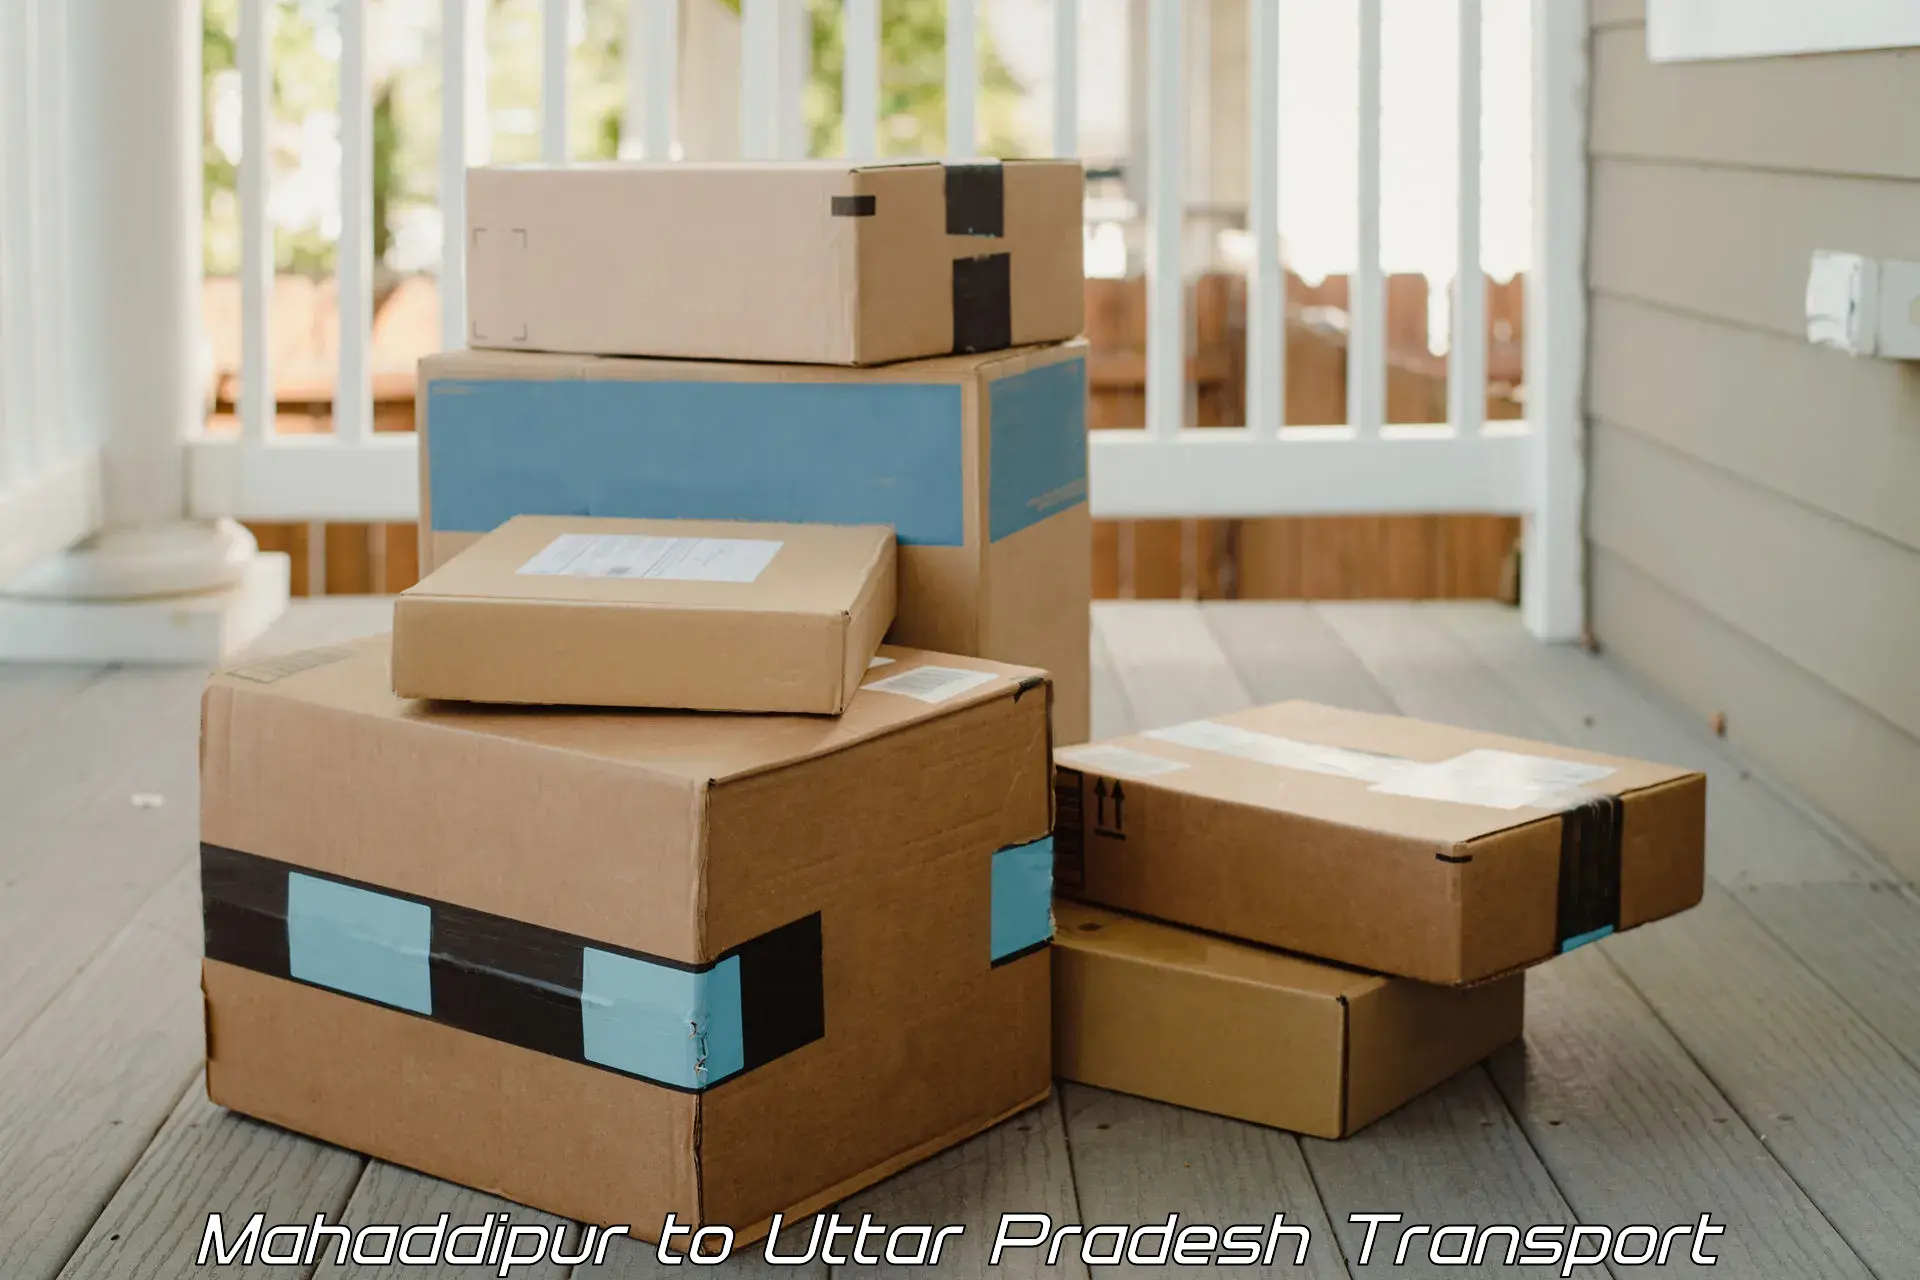 Goods delivery service Mahaddipur to Lalitpur